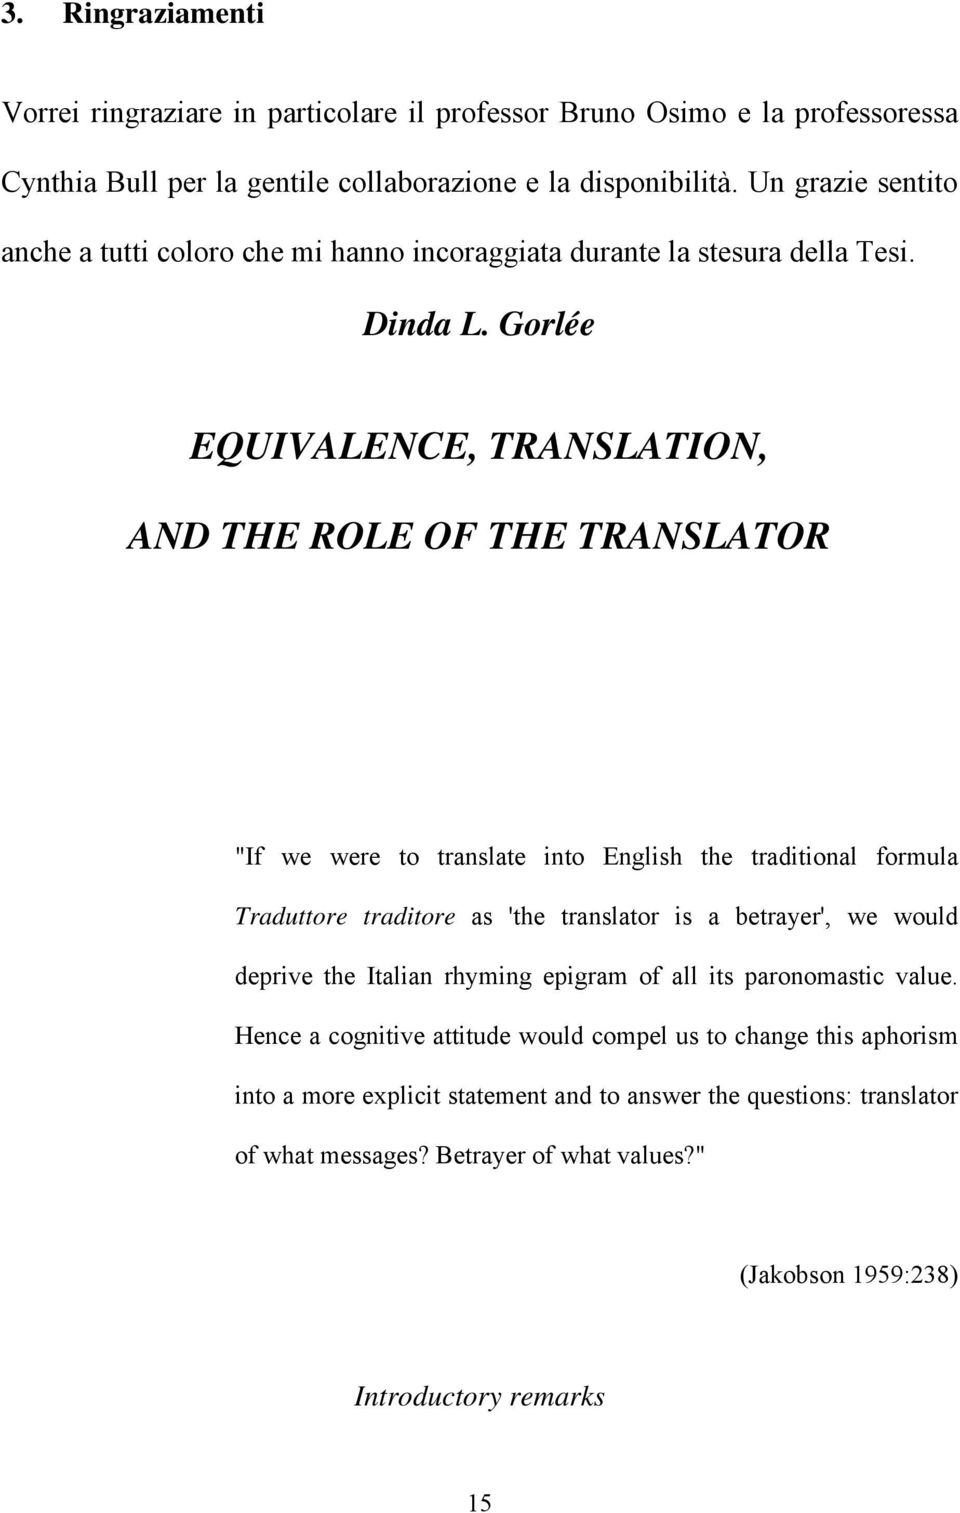 Gorlée EQUIVALENCE, TRANSLATION, AND THE ROLE OF THE TRANSLATOR "If we were to translate into English the traditional formula Traduttore traditore as 'the translator is a betrayer', we